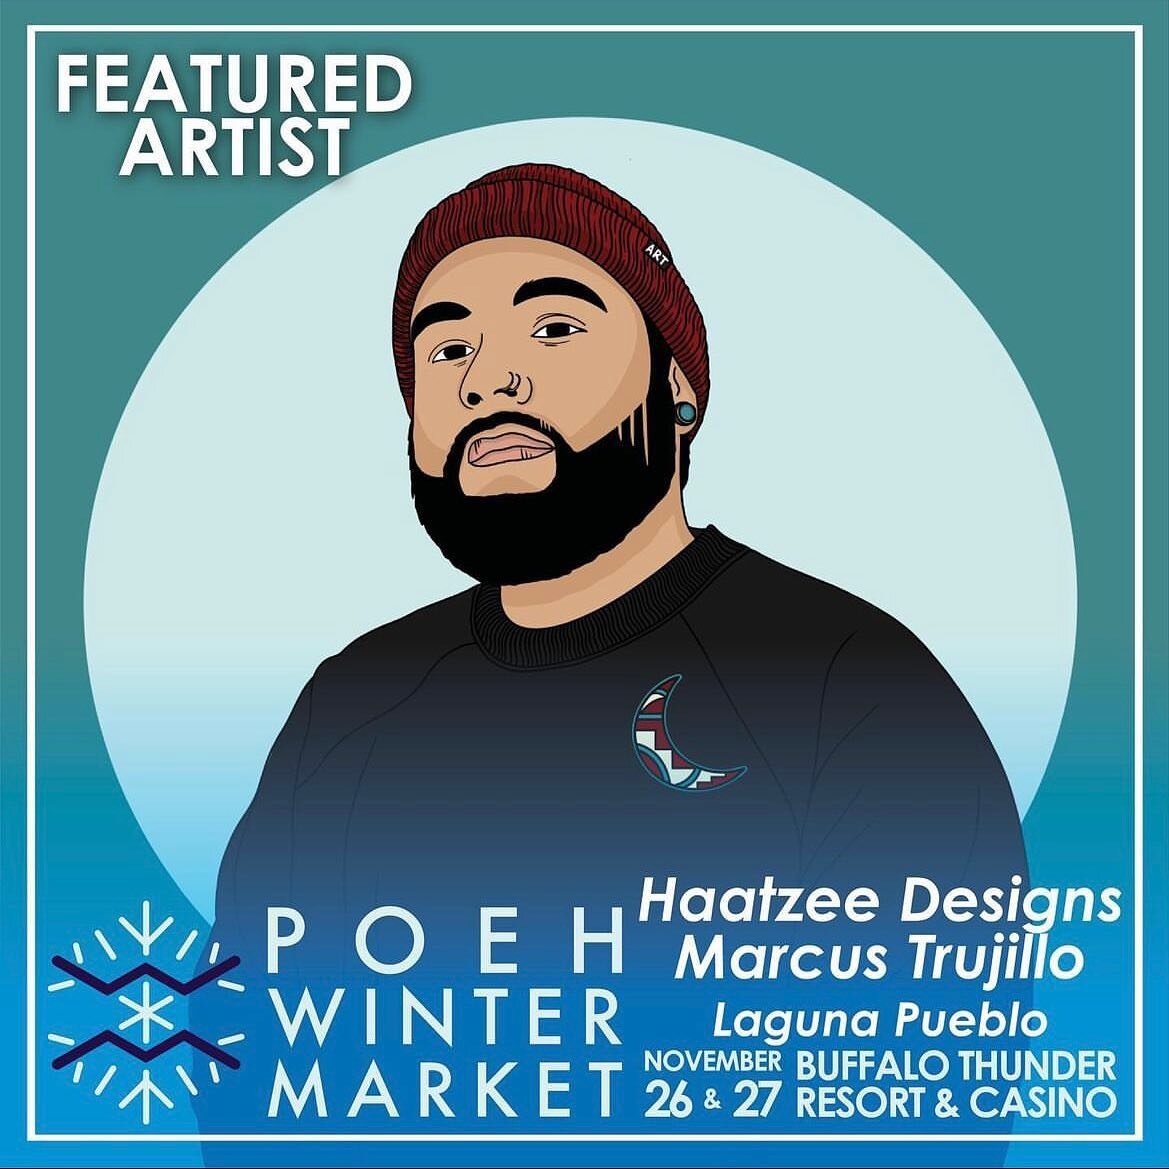 I&rsquo;ll be set up at @buffalothunderresort for the Poeh Winter Market hosted by @poehculturalcenter tomorrow and Sunday! 

Come out &amp; support 120+ Indigenous artists who will be set up for this event ✨ new prints and stickers will be available